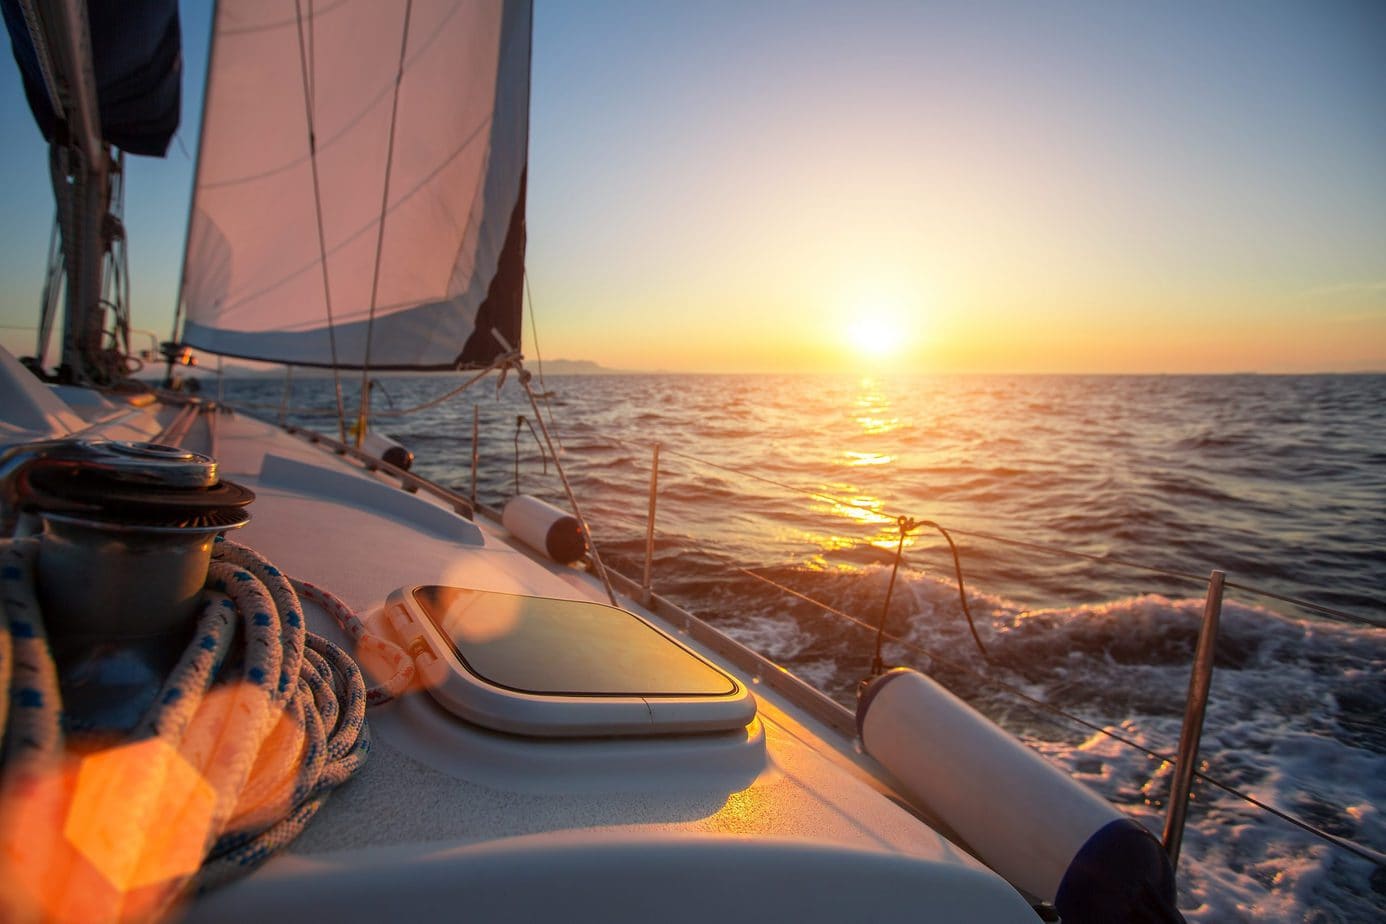 Set sail on wide waters. How to start your adventure with sailing?